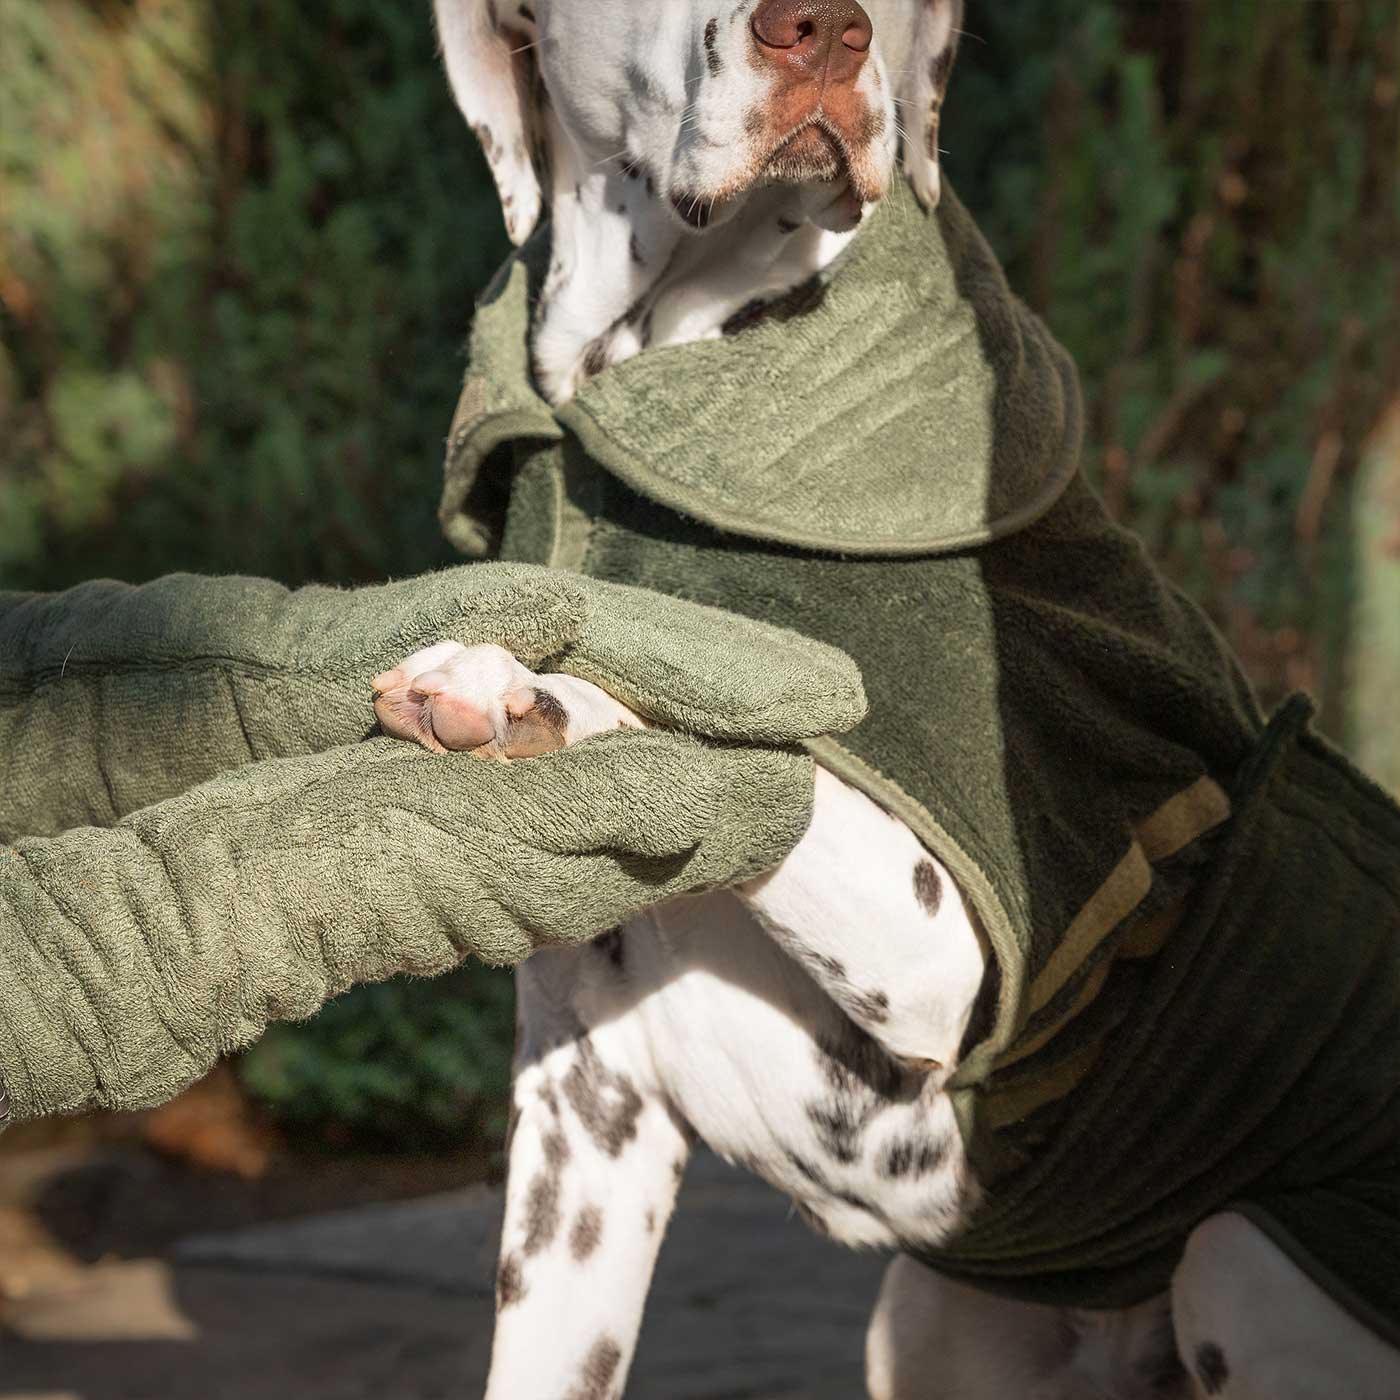 Introducing the ultimate bamboo dog drying mitts in beautiful fir green, made from luxurious bamboo to aid sensitive skin featuring universal size to fit all with super absorbent material for easy pet drying! The perfect dog drying gloves, available now at Lords & Labradors US,  In four colors!